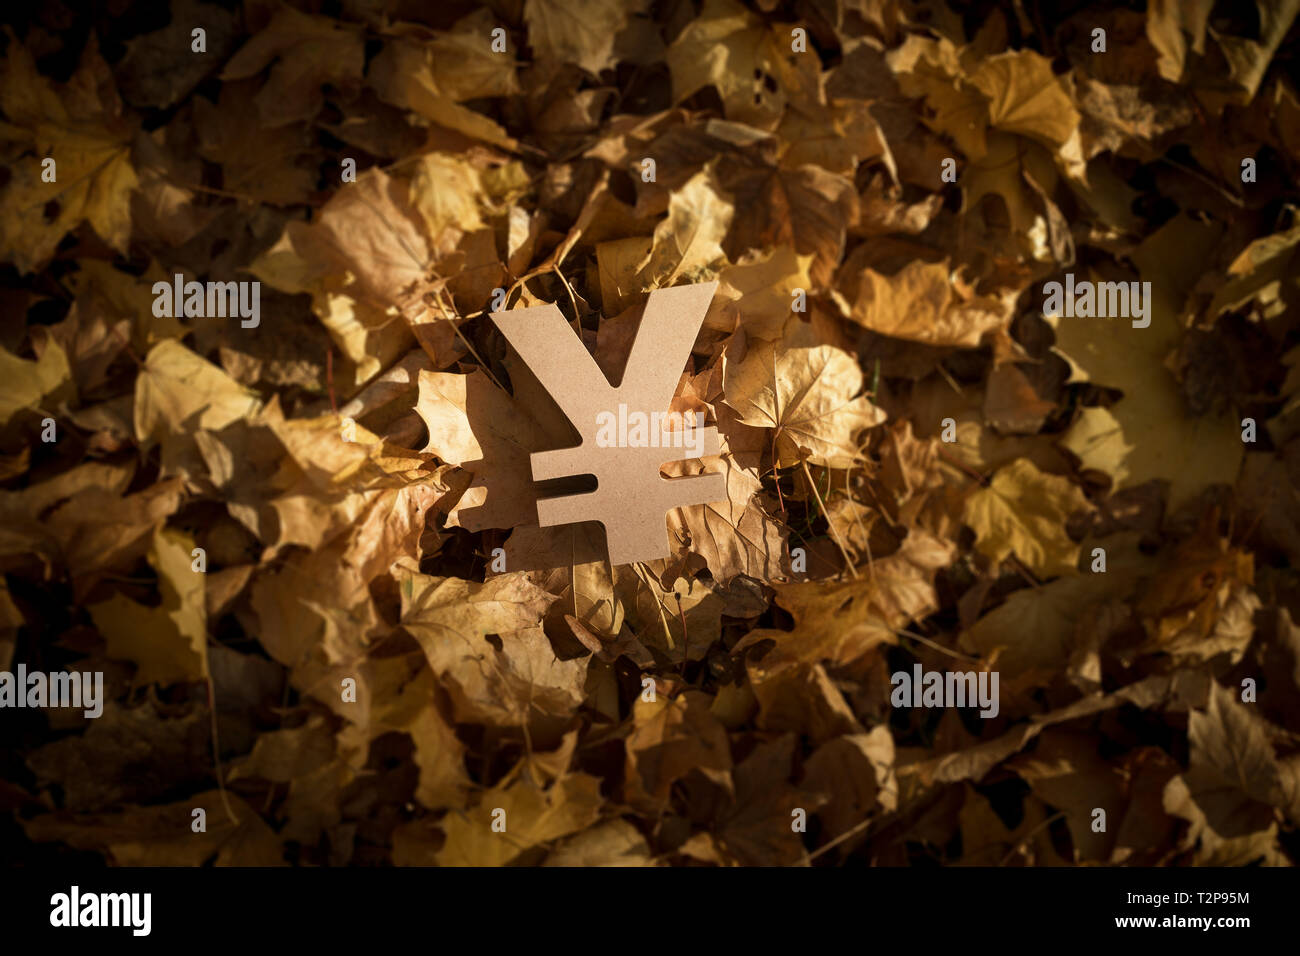 Japanese Yen or Chinese Yuan Currency Symbol on Autumn Leaves in Late evening Sun Stock Photo